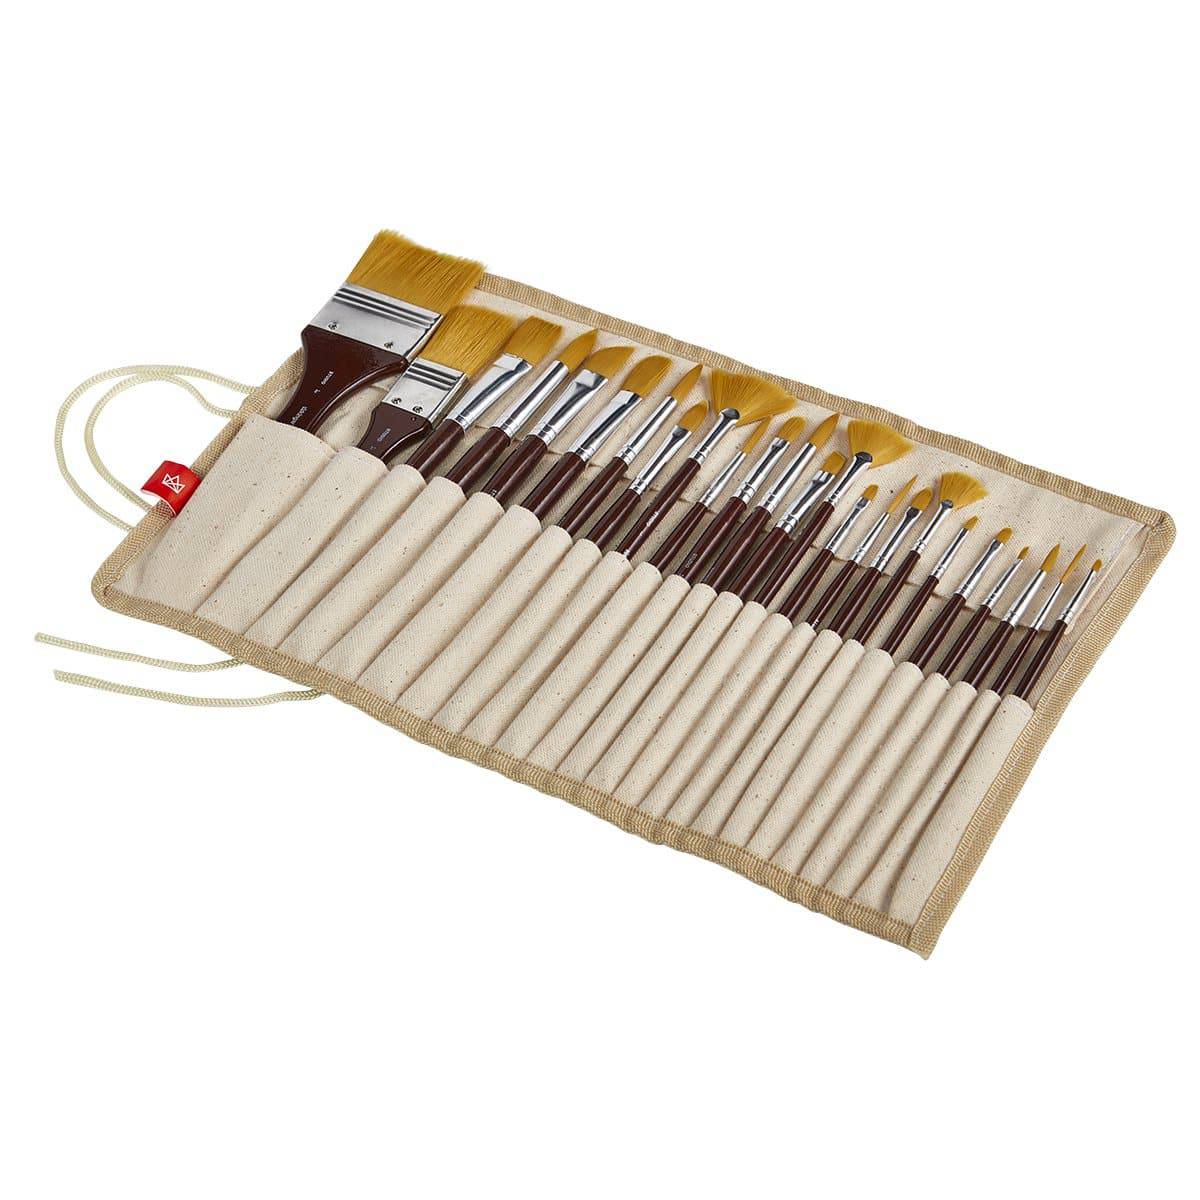 Plaid All-Purpose Craft Brush Pack, 25 pc - King Soopers